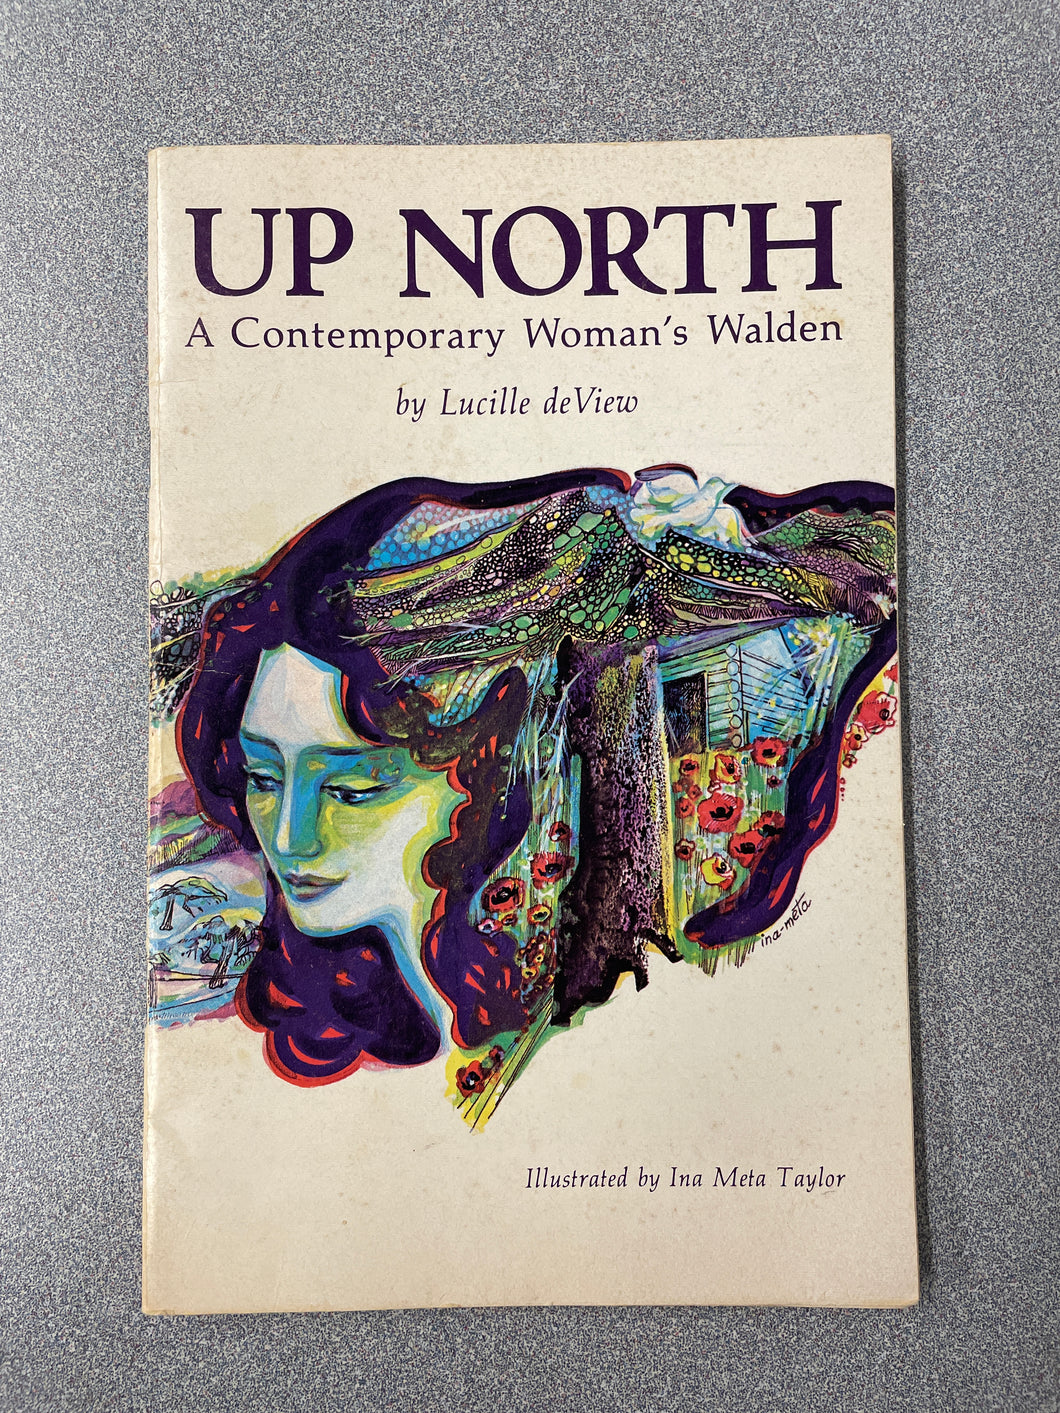 Up North: A Contemporary Woman's Walden, Lucille deView, [1977] MI 12/23